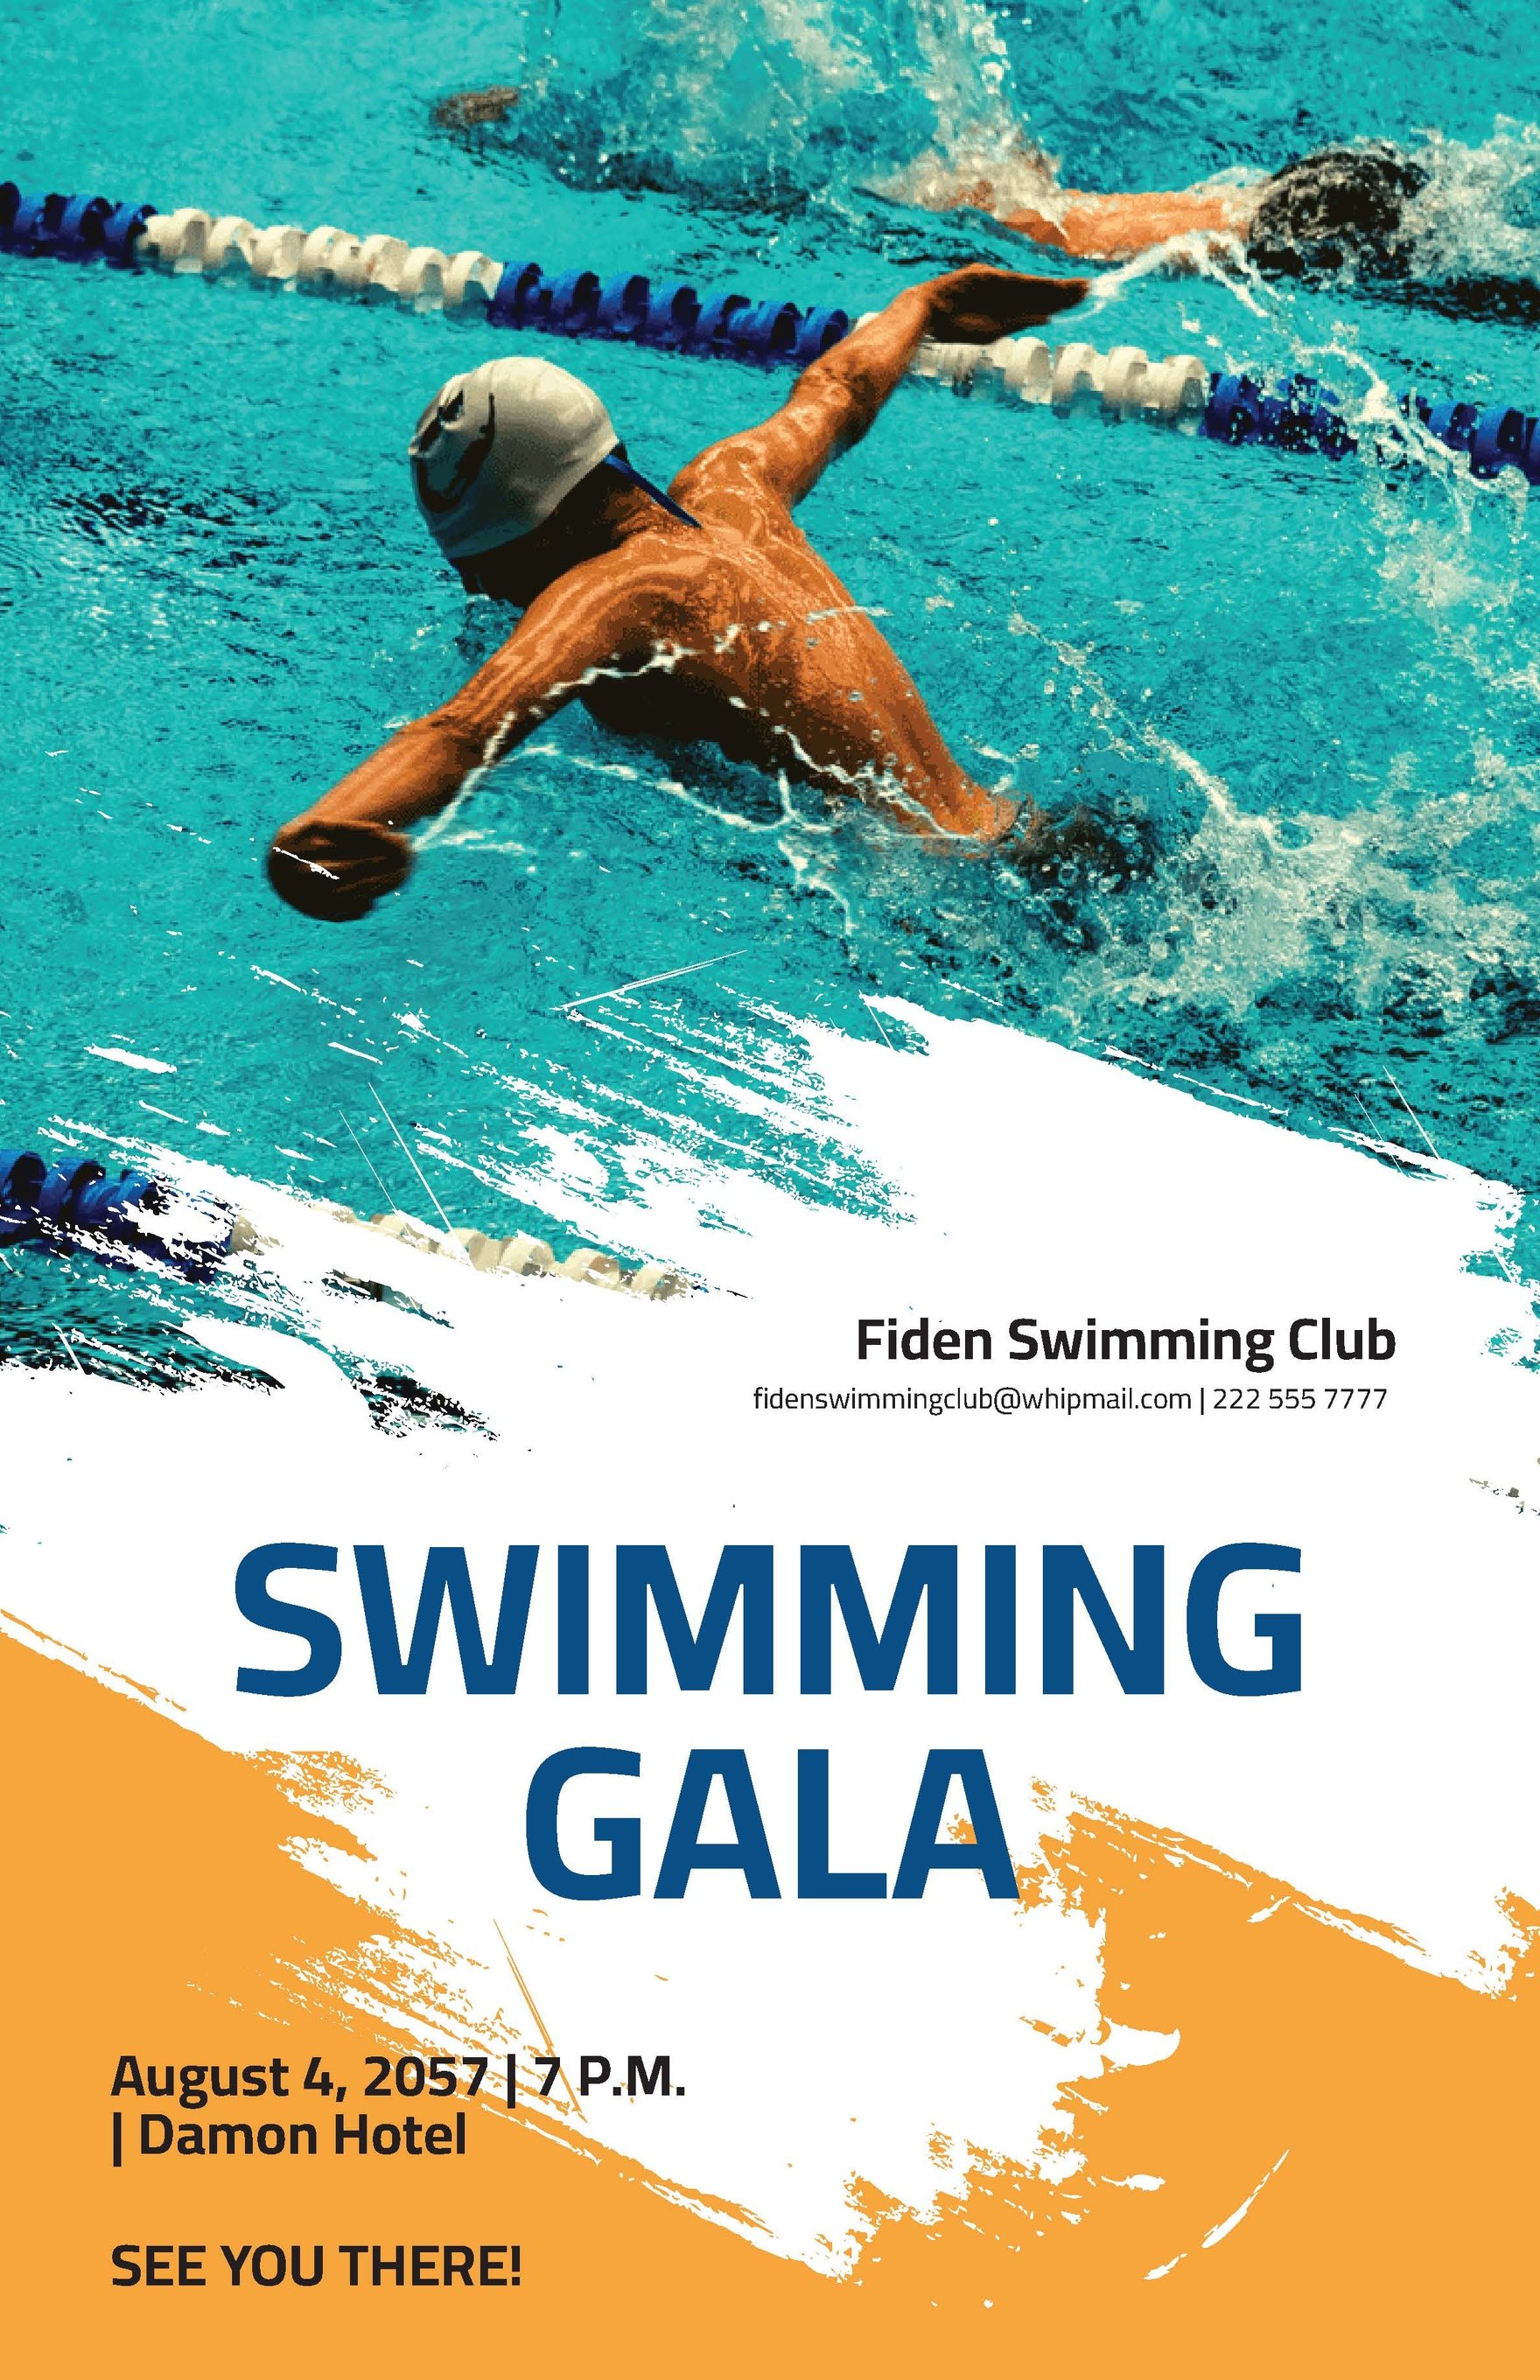 Swimming Gala Poster Template in Word, Google Docs, Illustrator, PSD, Apple Pages, Publisher